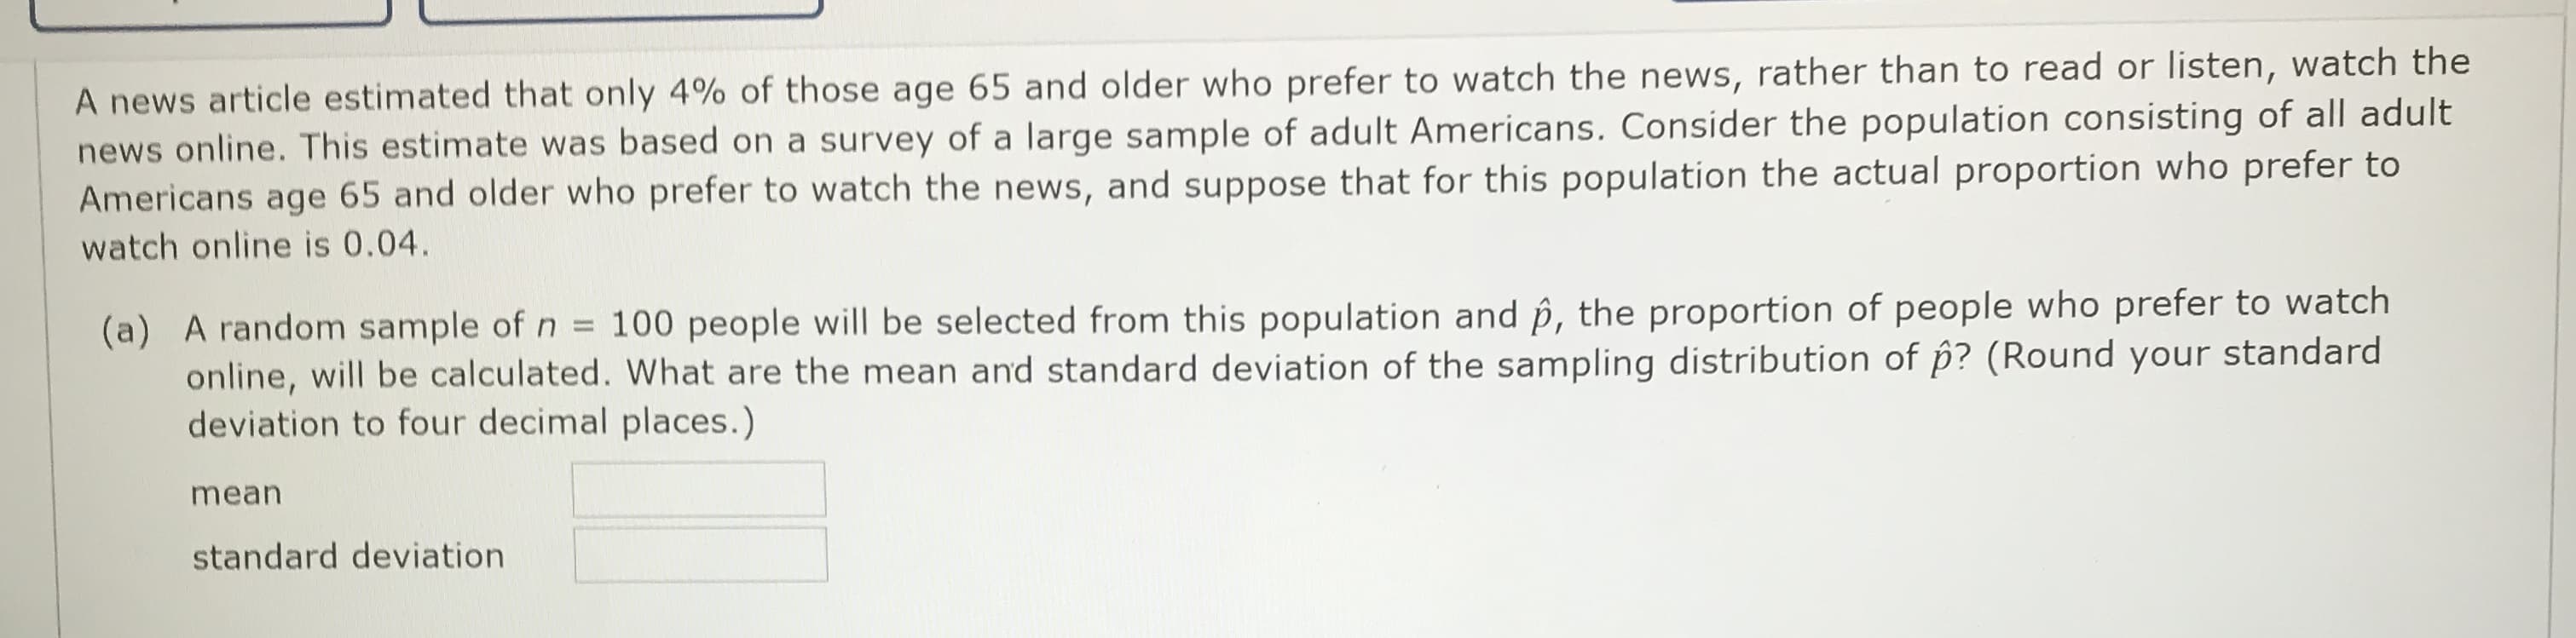 A news article estimated that only 4% of those age 65 and older who prefer to watch the news, rather than to read or listen, watch the
news online. This estimate was based on a survey of a large sample of adult Americans. Consider the population consisting of all adult
Americans age 65 and older who prefer to watch the news, and suppose that for this population the actual proportion who prefer to
watch online is 0.04.
(a) A random sample of n = 100 people will be selected from this population and p, the proportion of people who prefer to watch
online, will be calculated. What are the mean and standard deviation of the sampling distribution of p? (Round your standard
deviation to four decimal places.)
%3D
mean
standard deviation
